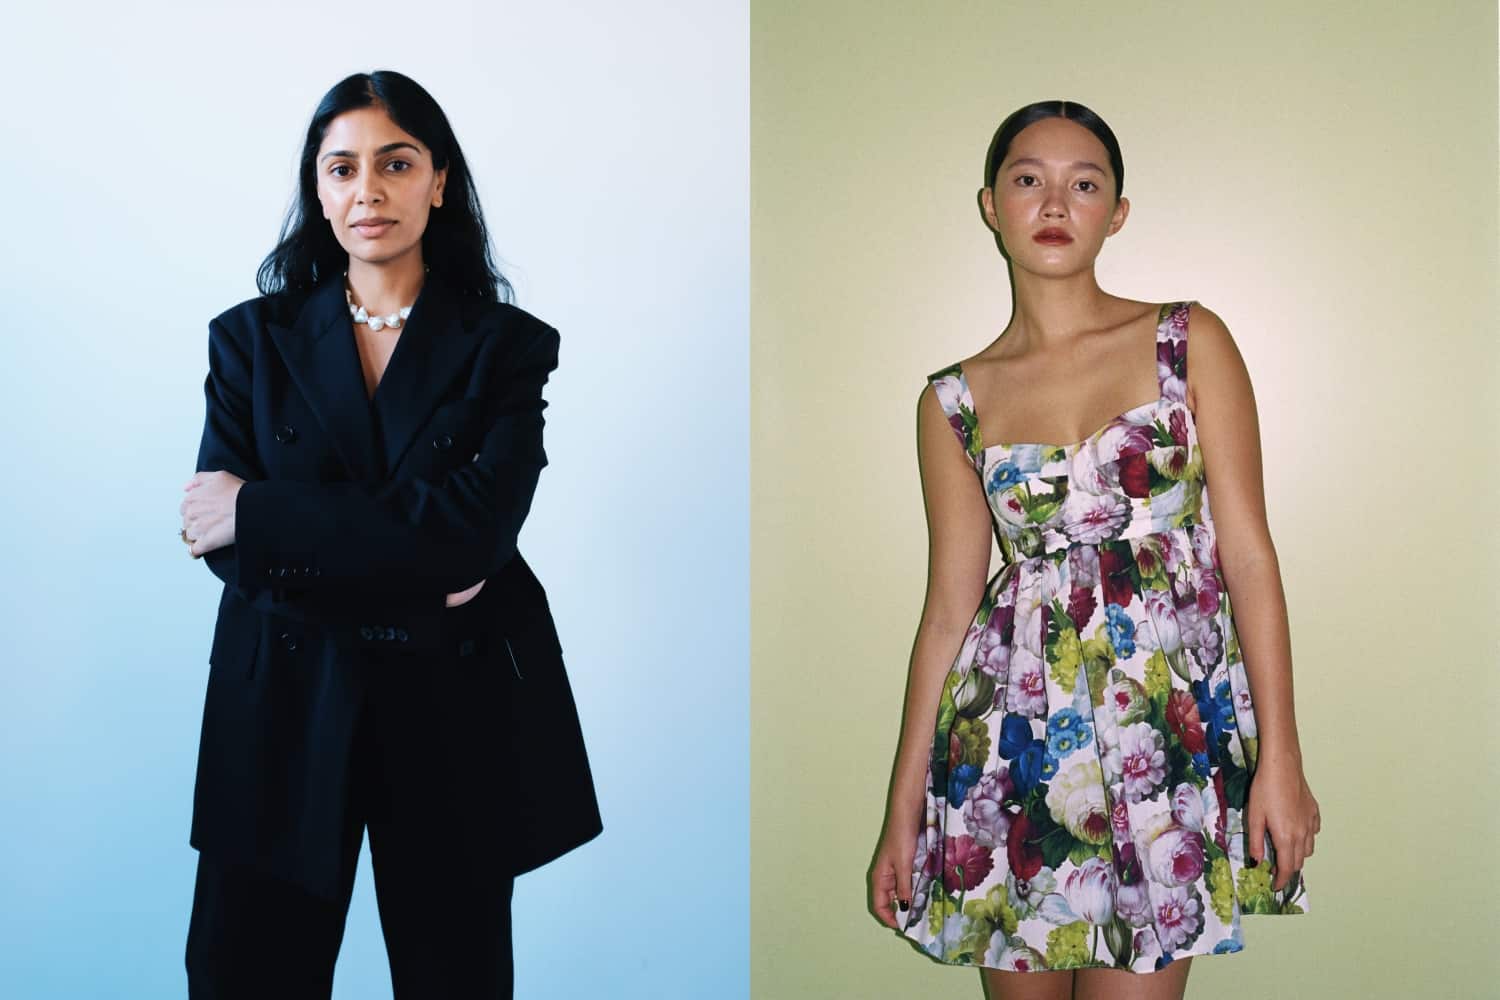 Coterie’s New VP, Dolce & Gabbana Team Up With Farfetch, Cindy Kimberly’s New Collab, Plus! Iconic SATC Looks Up For Auction…